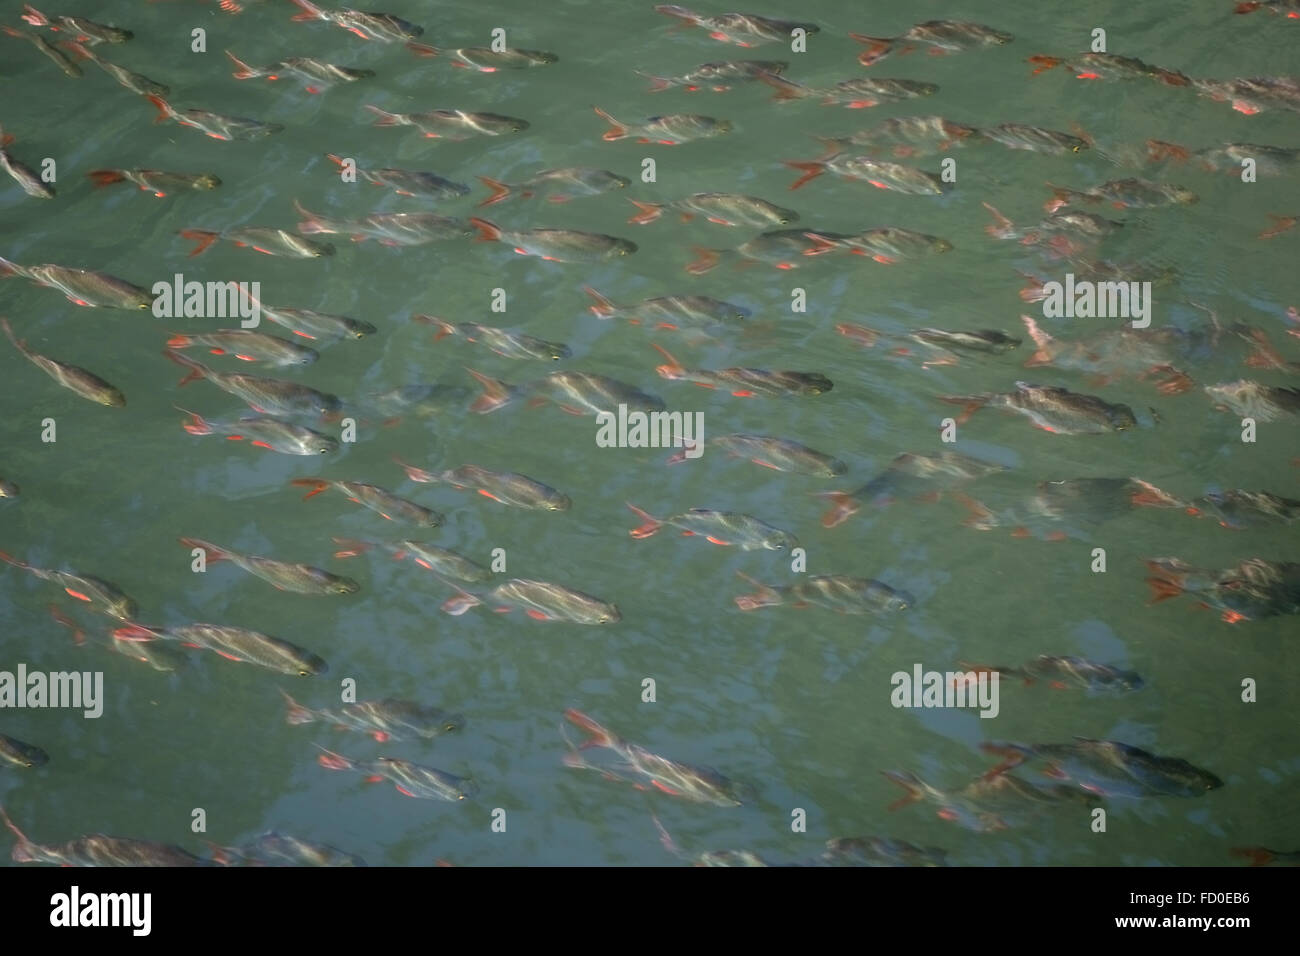 Tinfoil barbs, Barbonymus schwanenfeldii, a shoal of fish swimming in the shallow water on the River Kwai Stock Photo